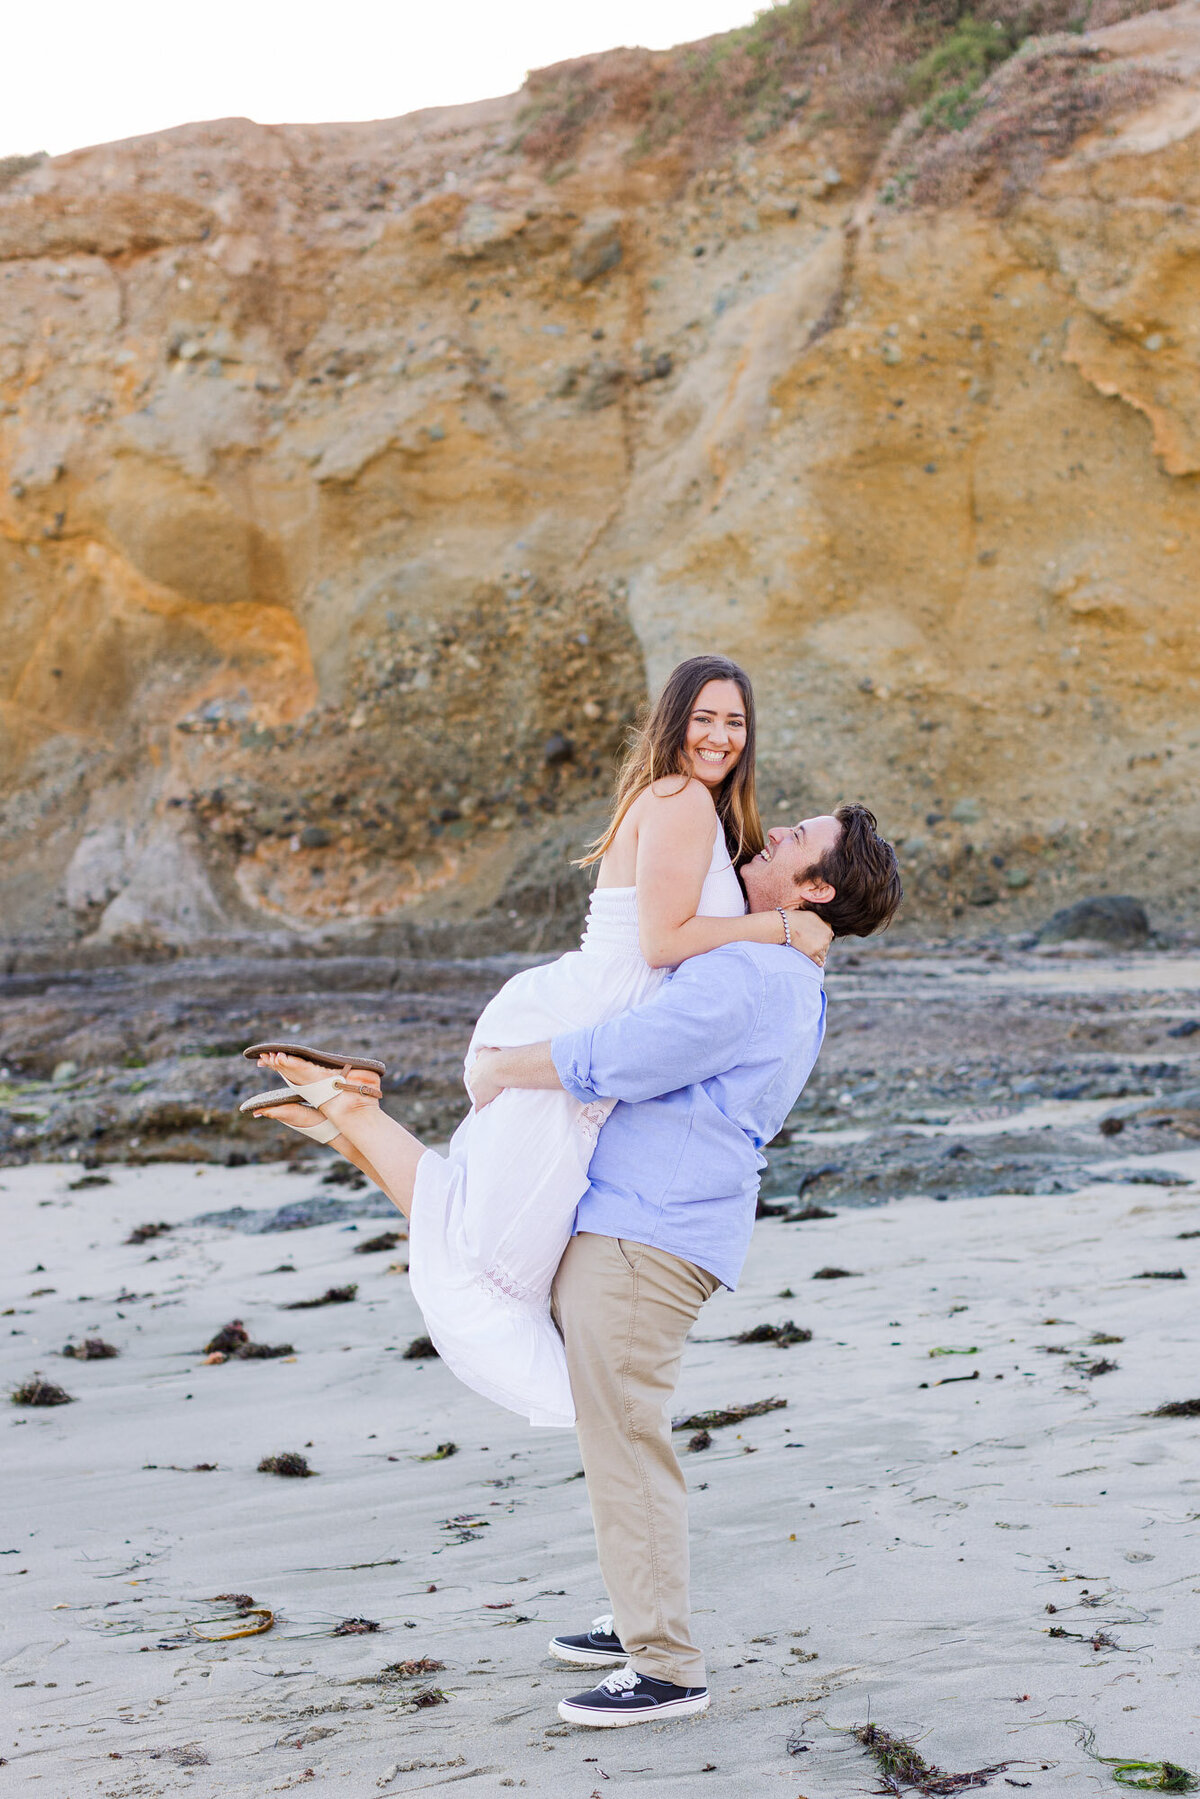 Laguna Beach CA engagement session at Montage Hotel colorful fun candid photo on epic beach by Joanna Monger Photography